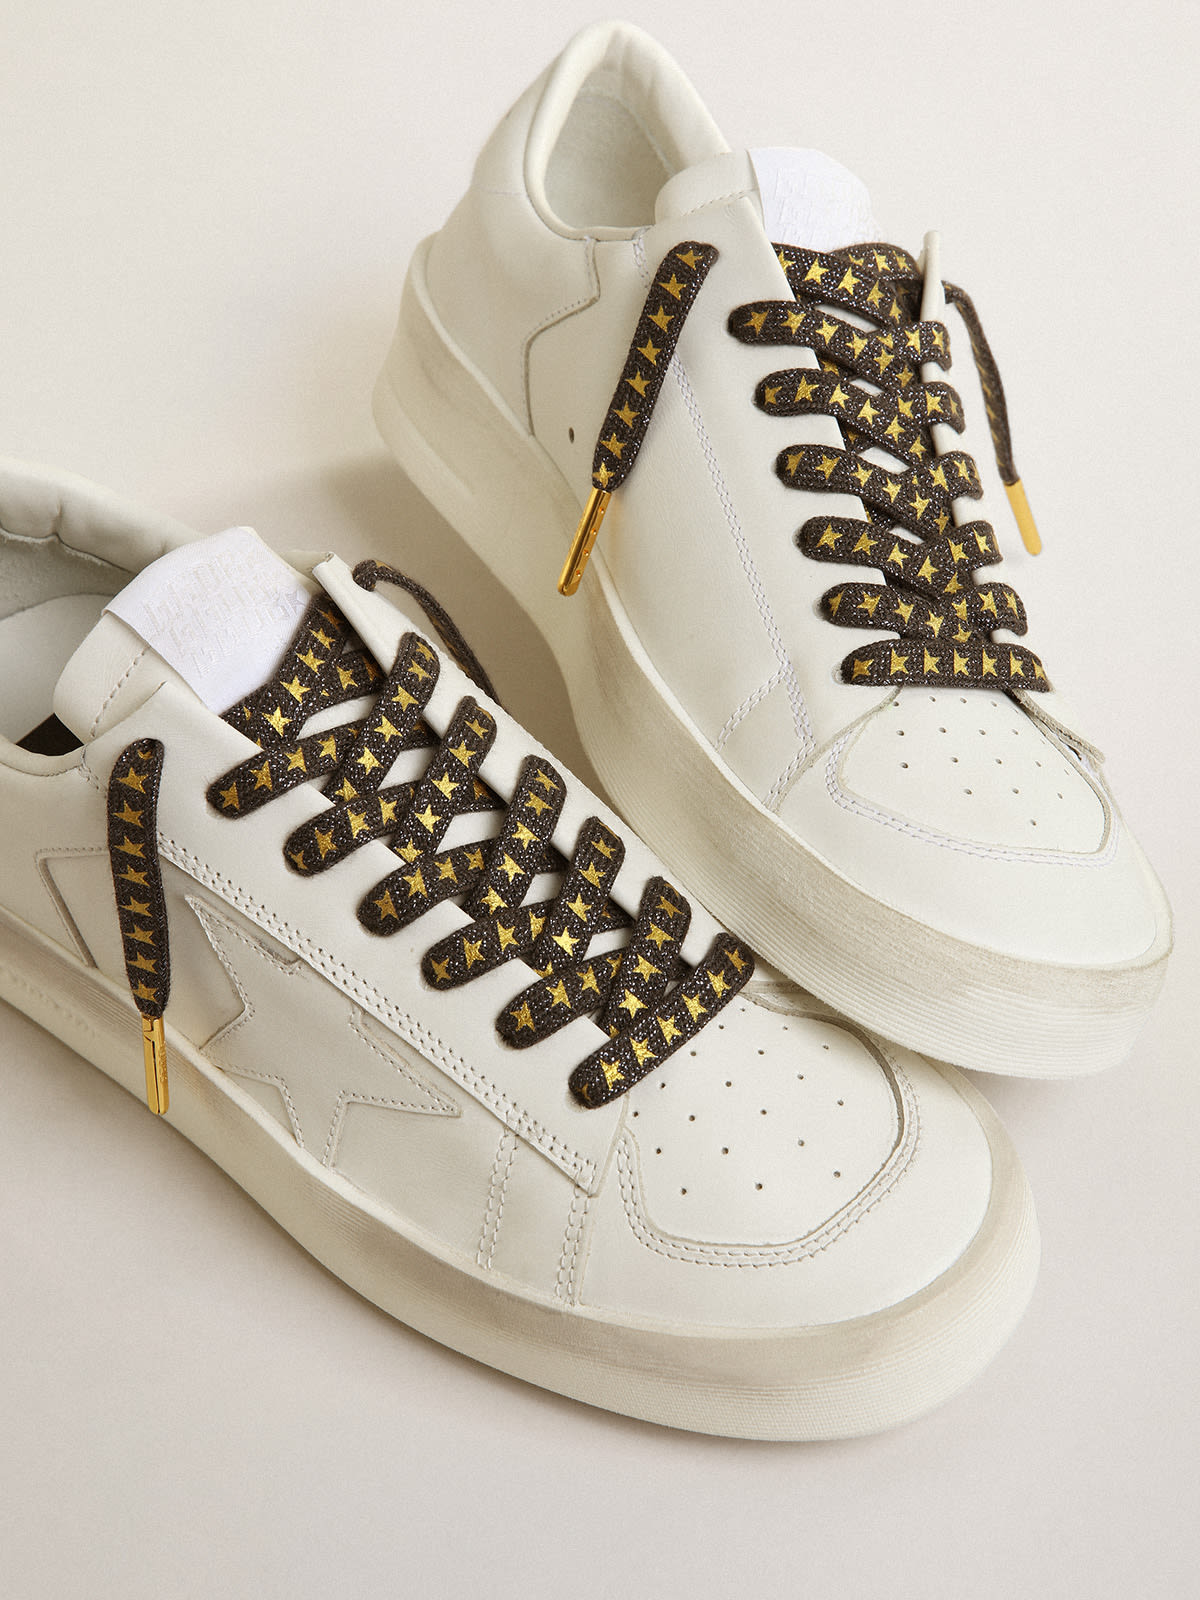 Golden Goose - Dark gray Lurex laces with contrasting gold stars in 